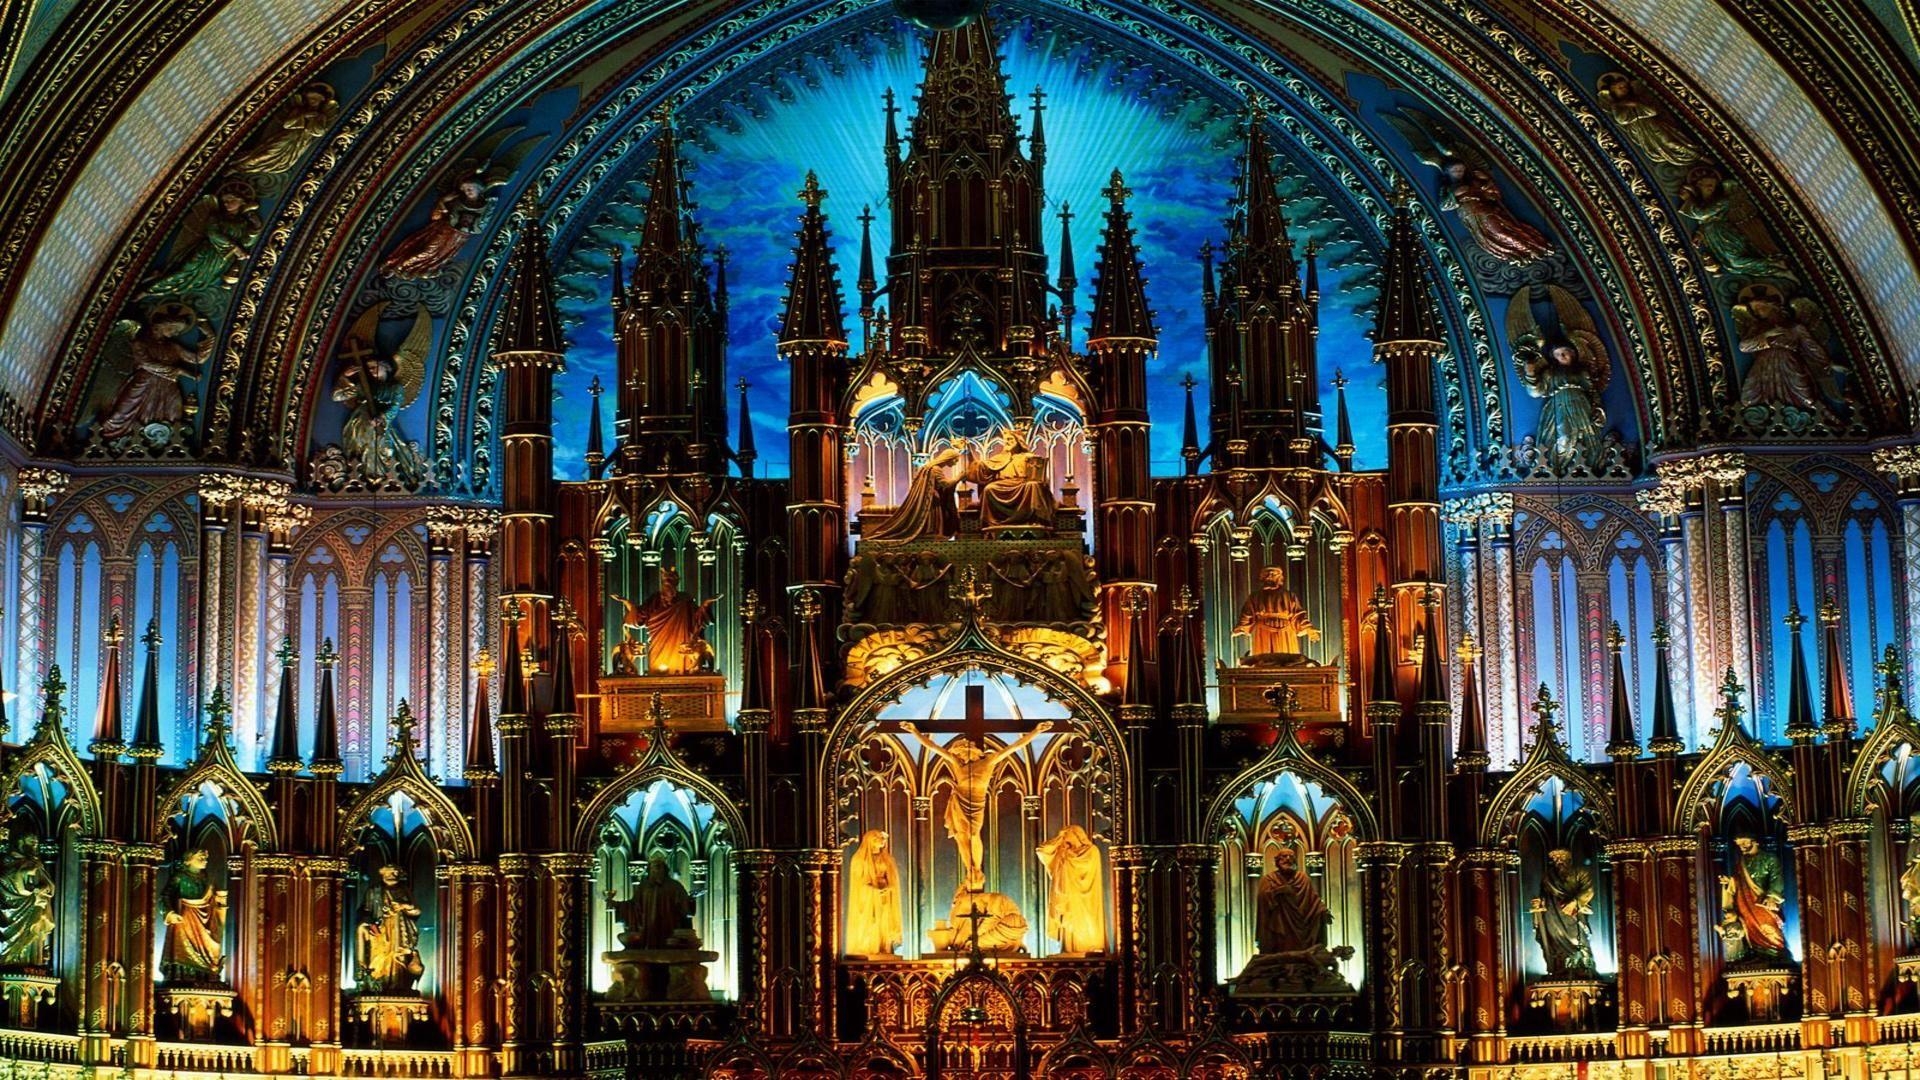 40+] Notre Dame Cathedral Wallpaper on